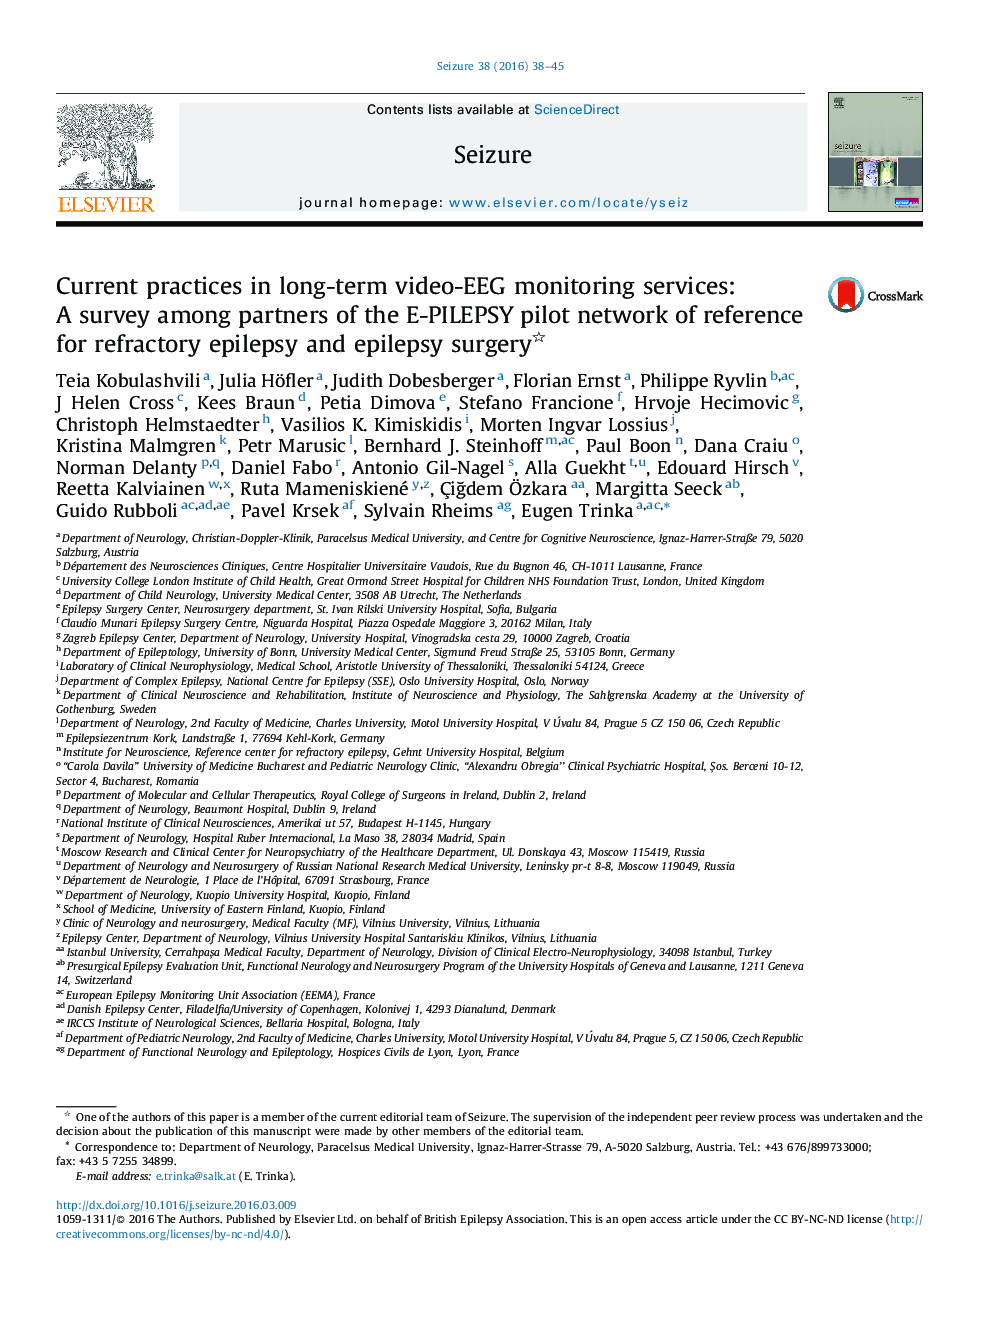 Current practices in long-term video-EEG monitoring services: A survey among partners of the E-PILEPSY pilot network of reference for refractory epilepsy and epilepsy surgery